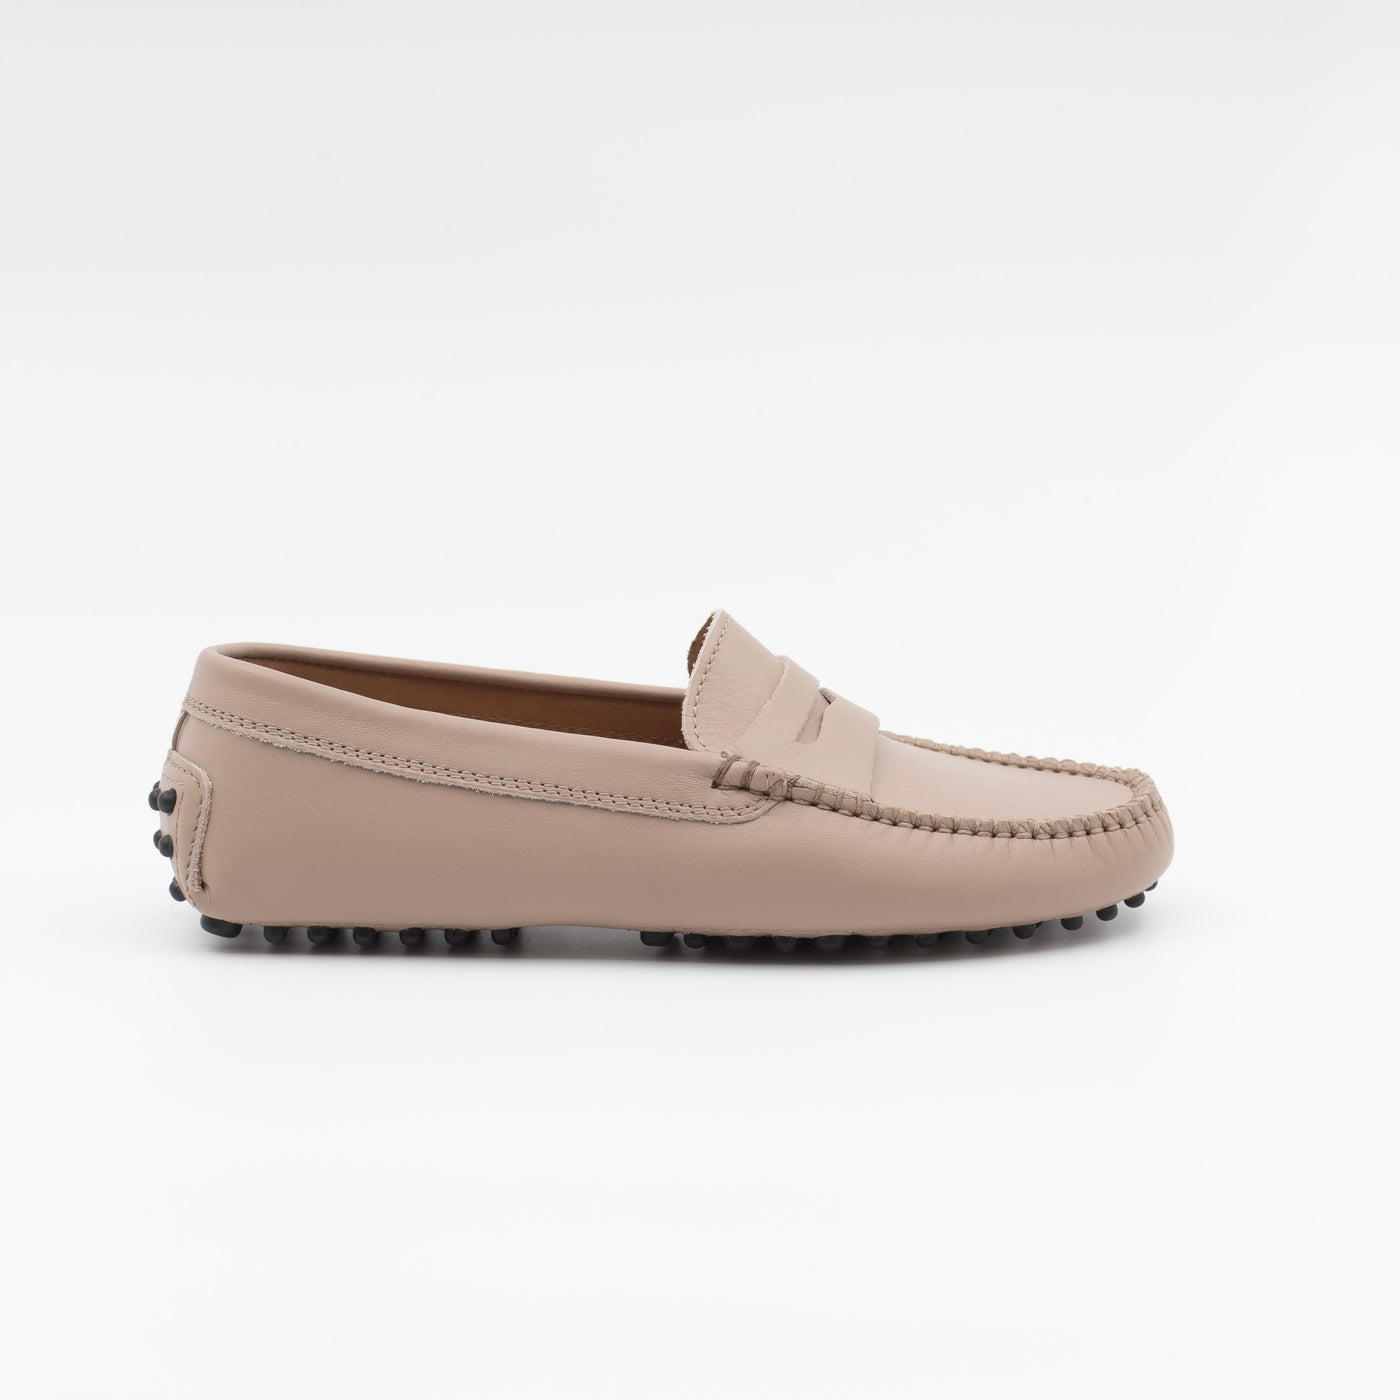 Gommino loafer in beige leather